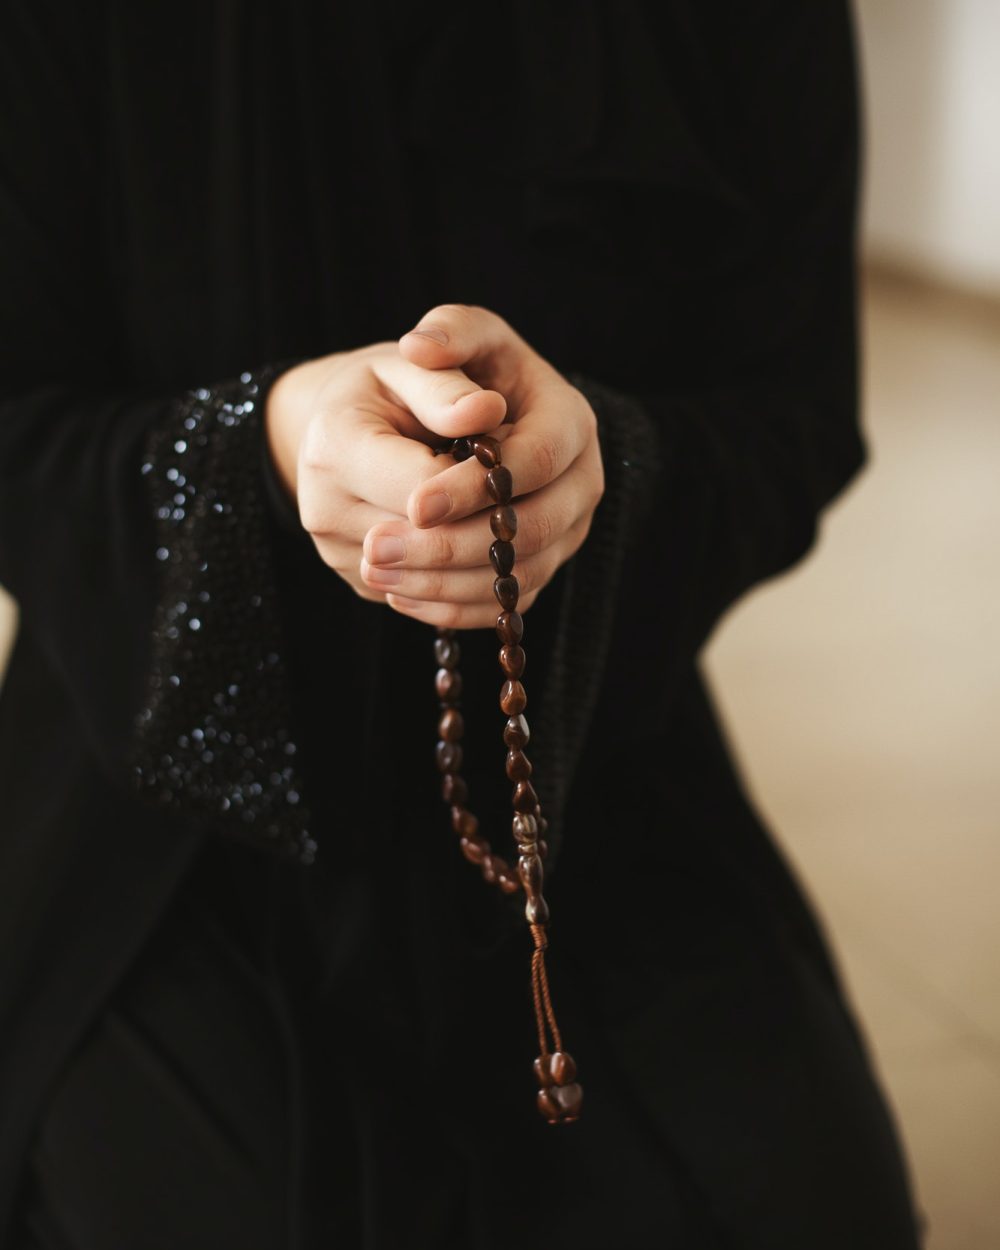 prayer-hands-of-a-woman-holding-a-rosary.jpg